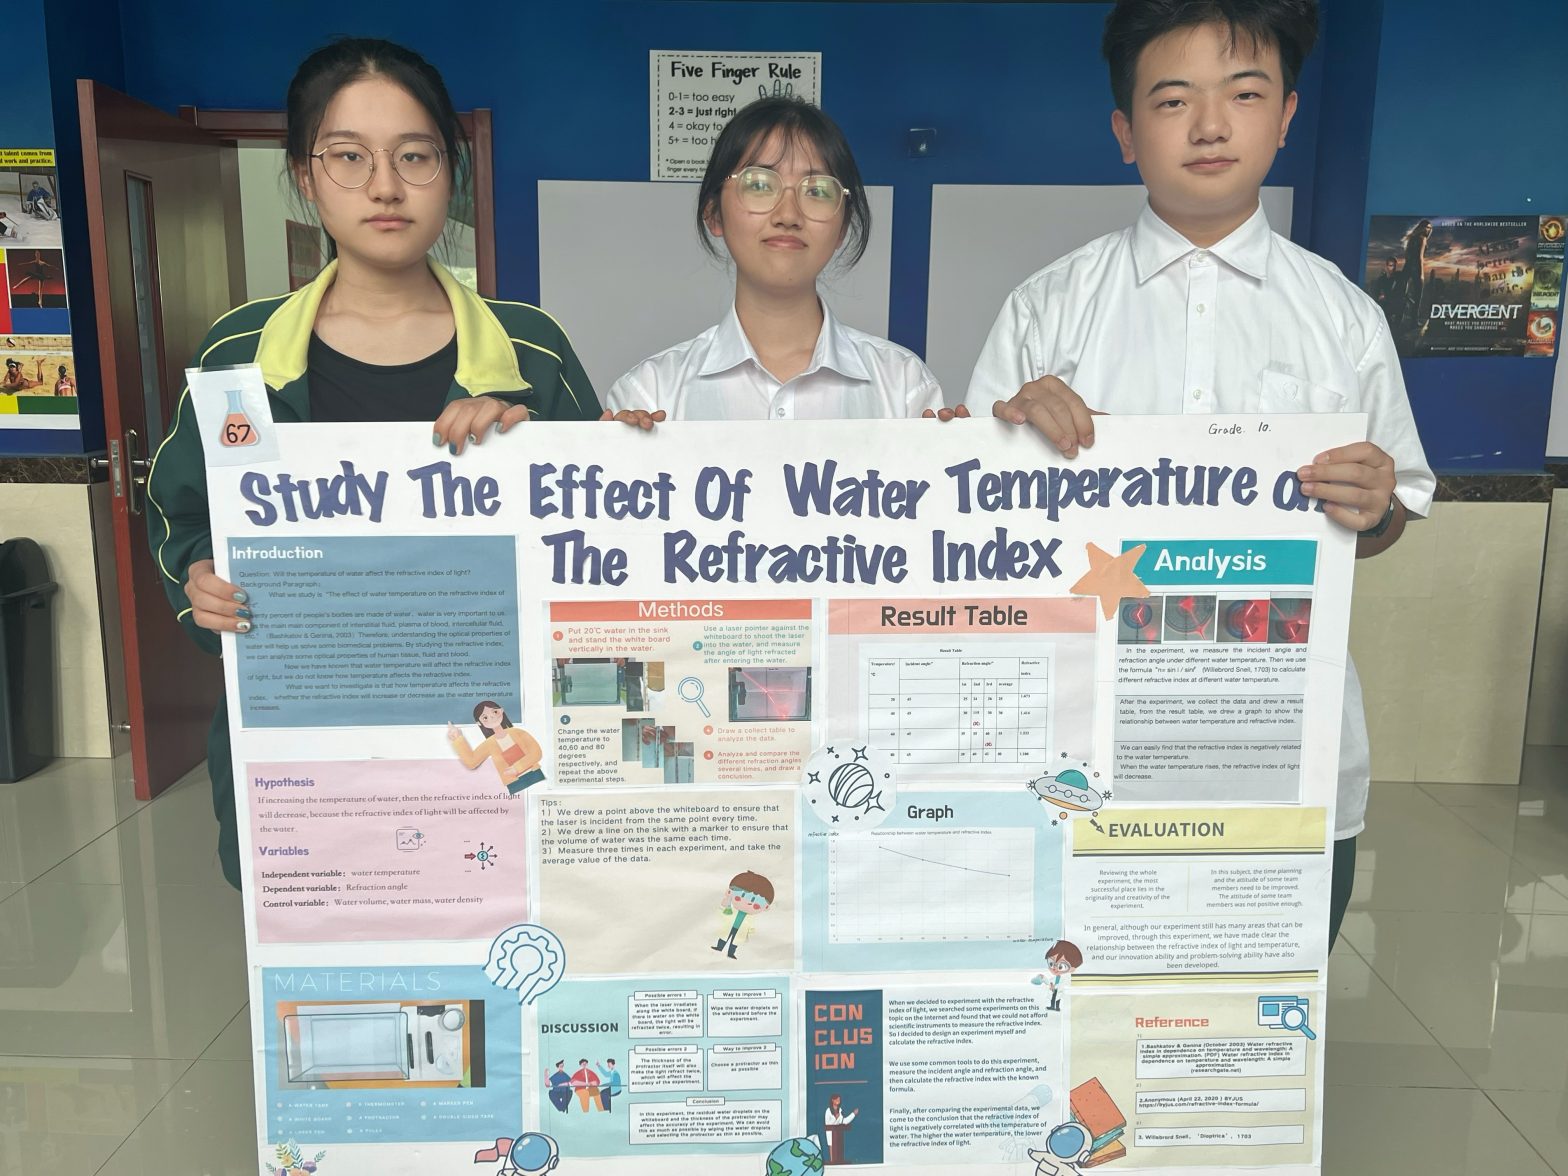 Study the Effect of Water Temperature on the Refractive Index of a material.